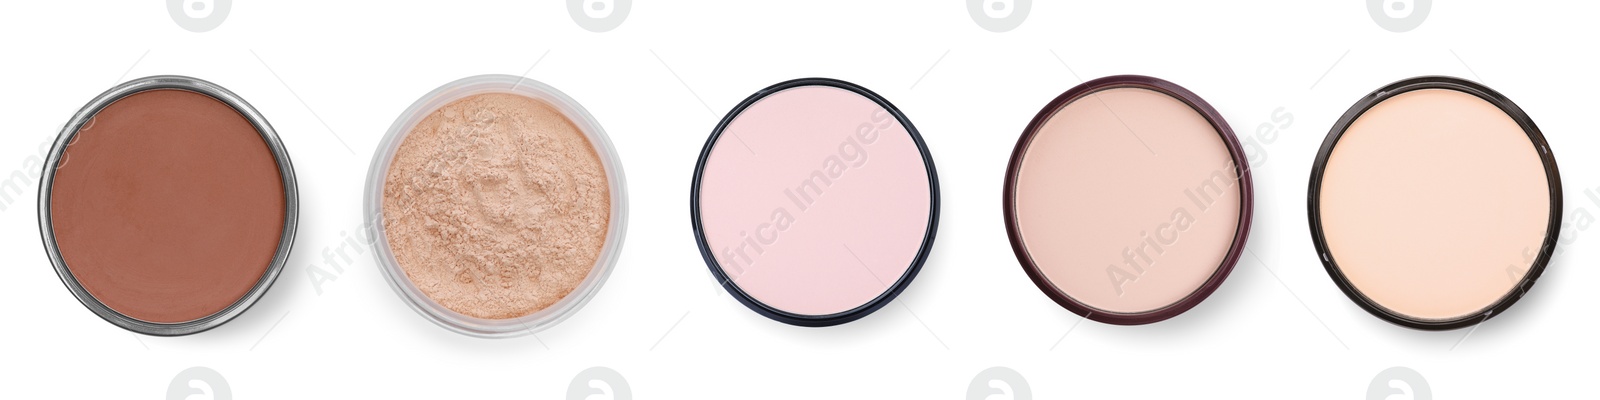 Image of Different face powders isolated on white, top view. Collection of makeup products